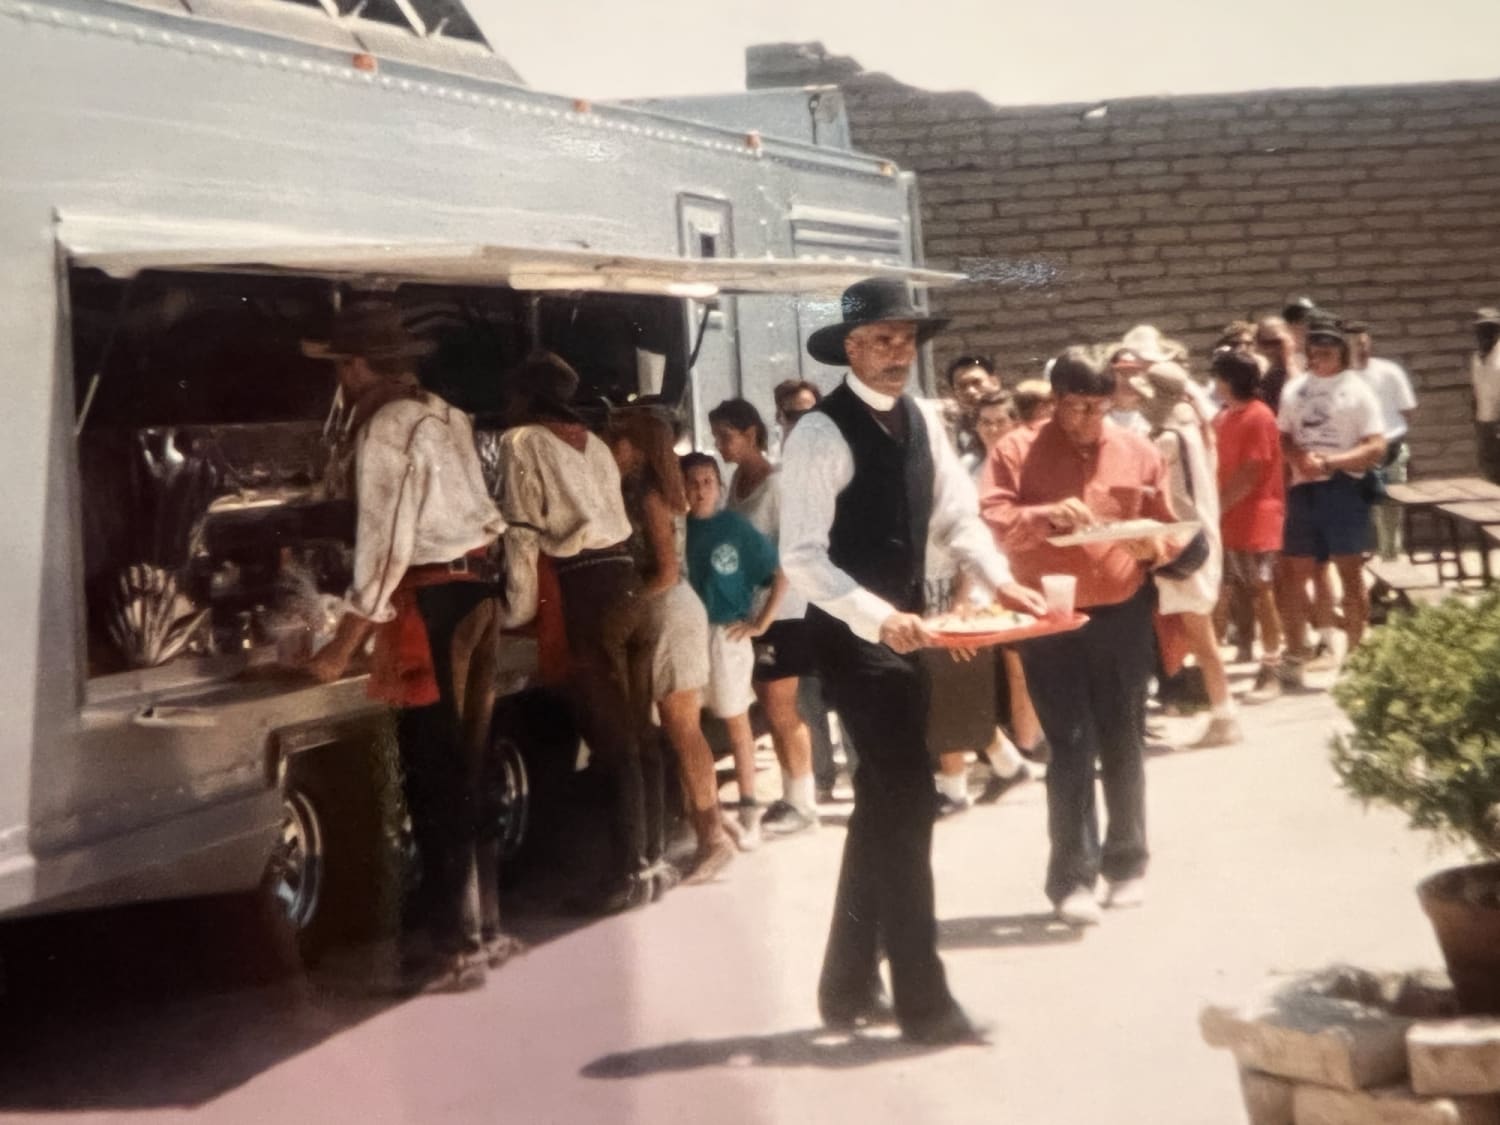 Sam Elliott getting lunch from a food truck on the set of Tombstone in Old Tucson (1993)